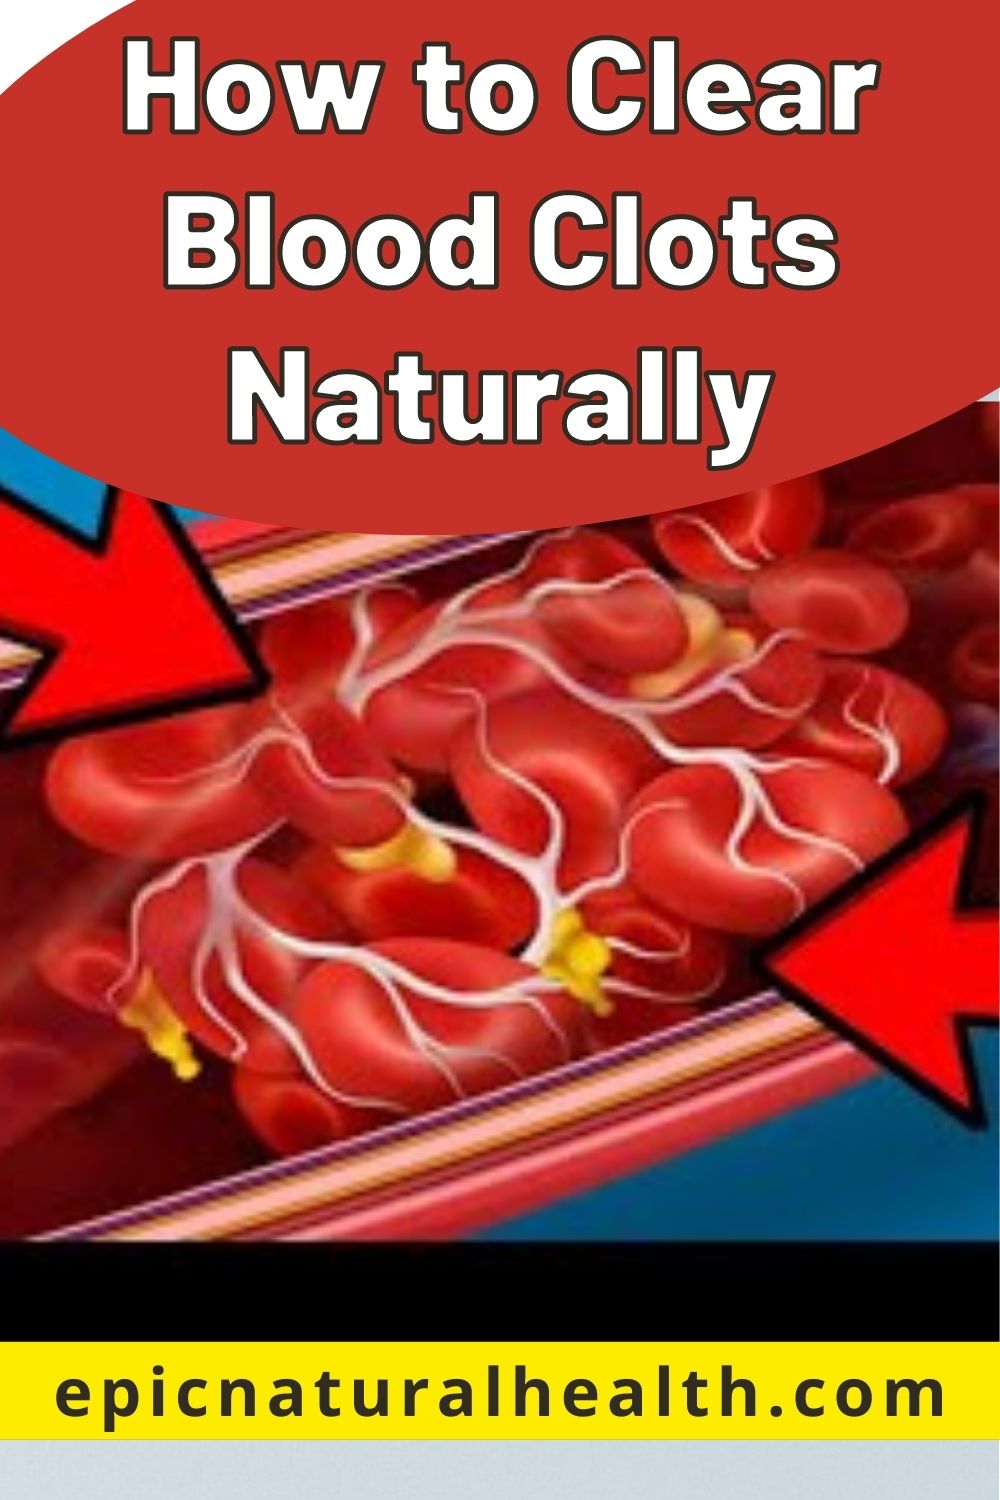 How to Clear Blood Clots Naturally